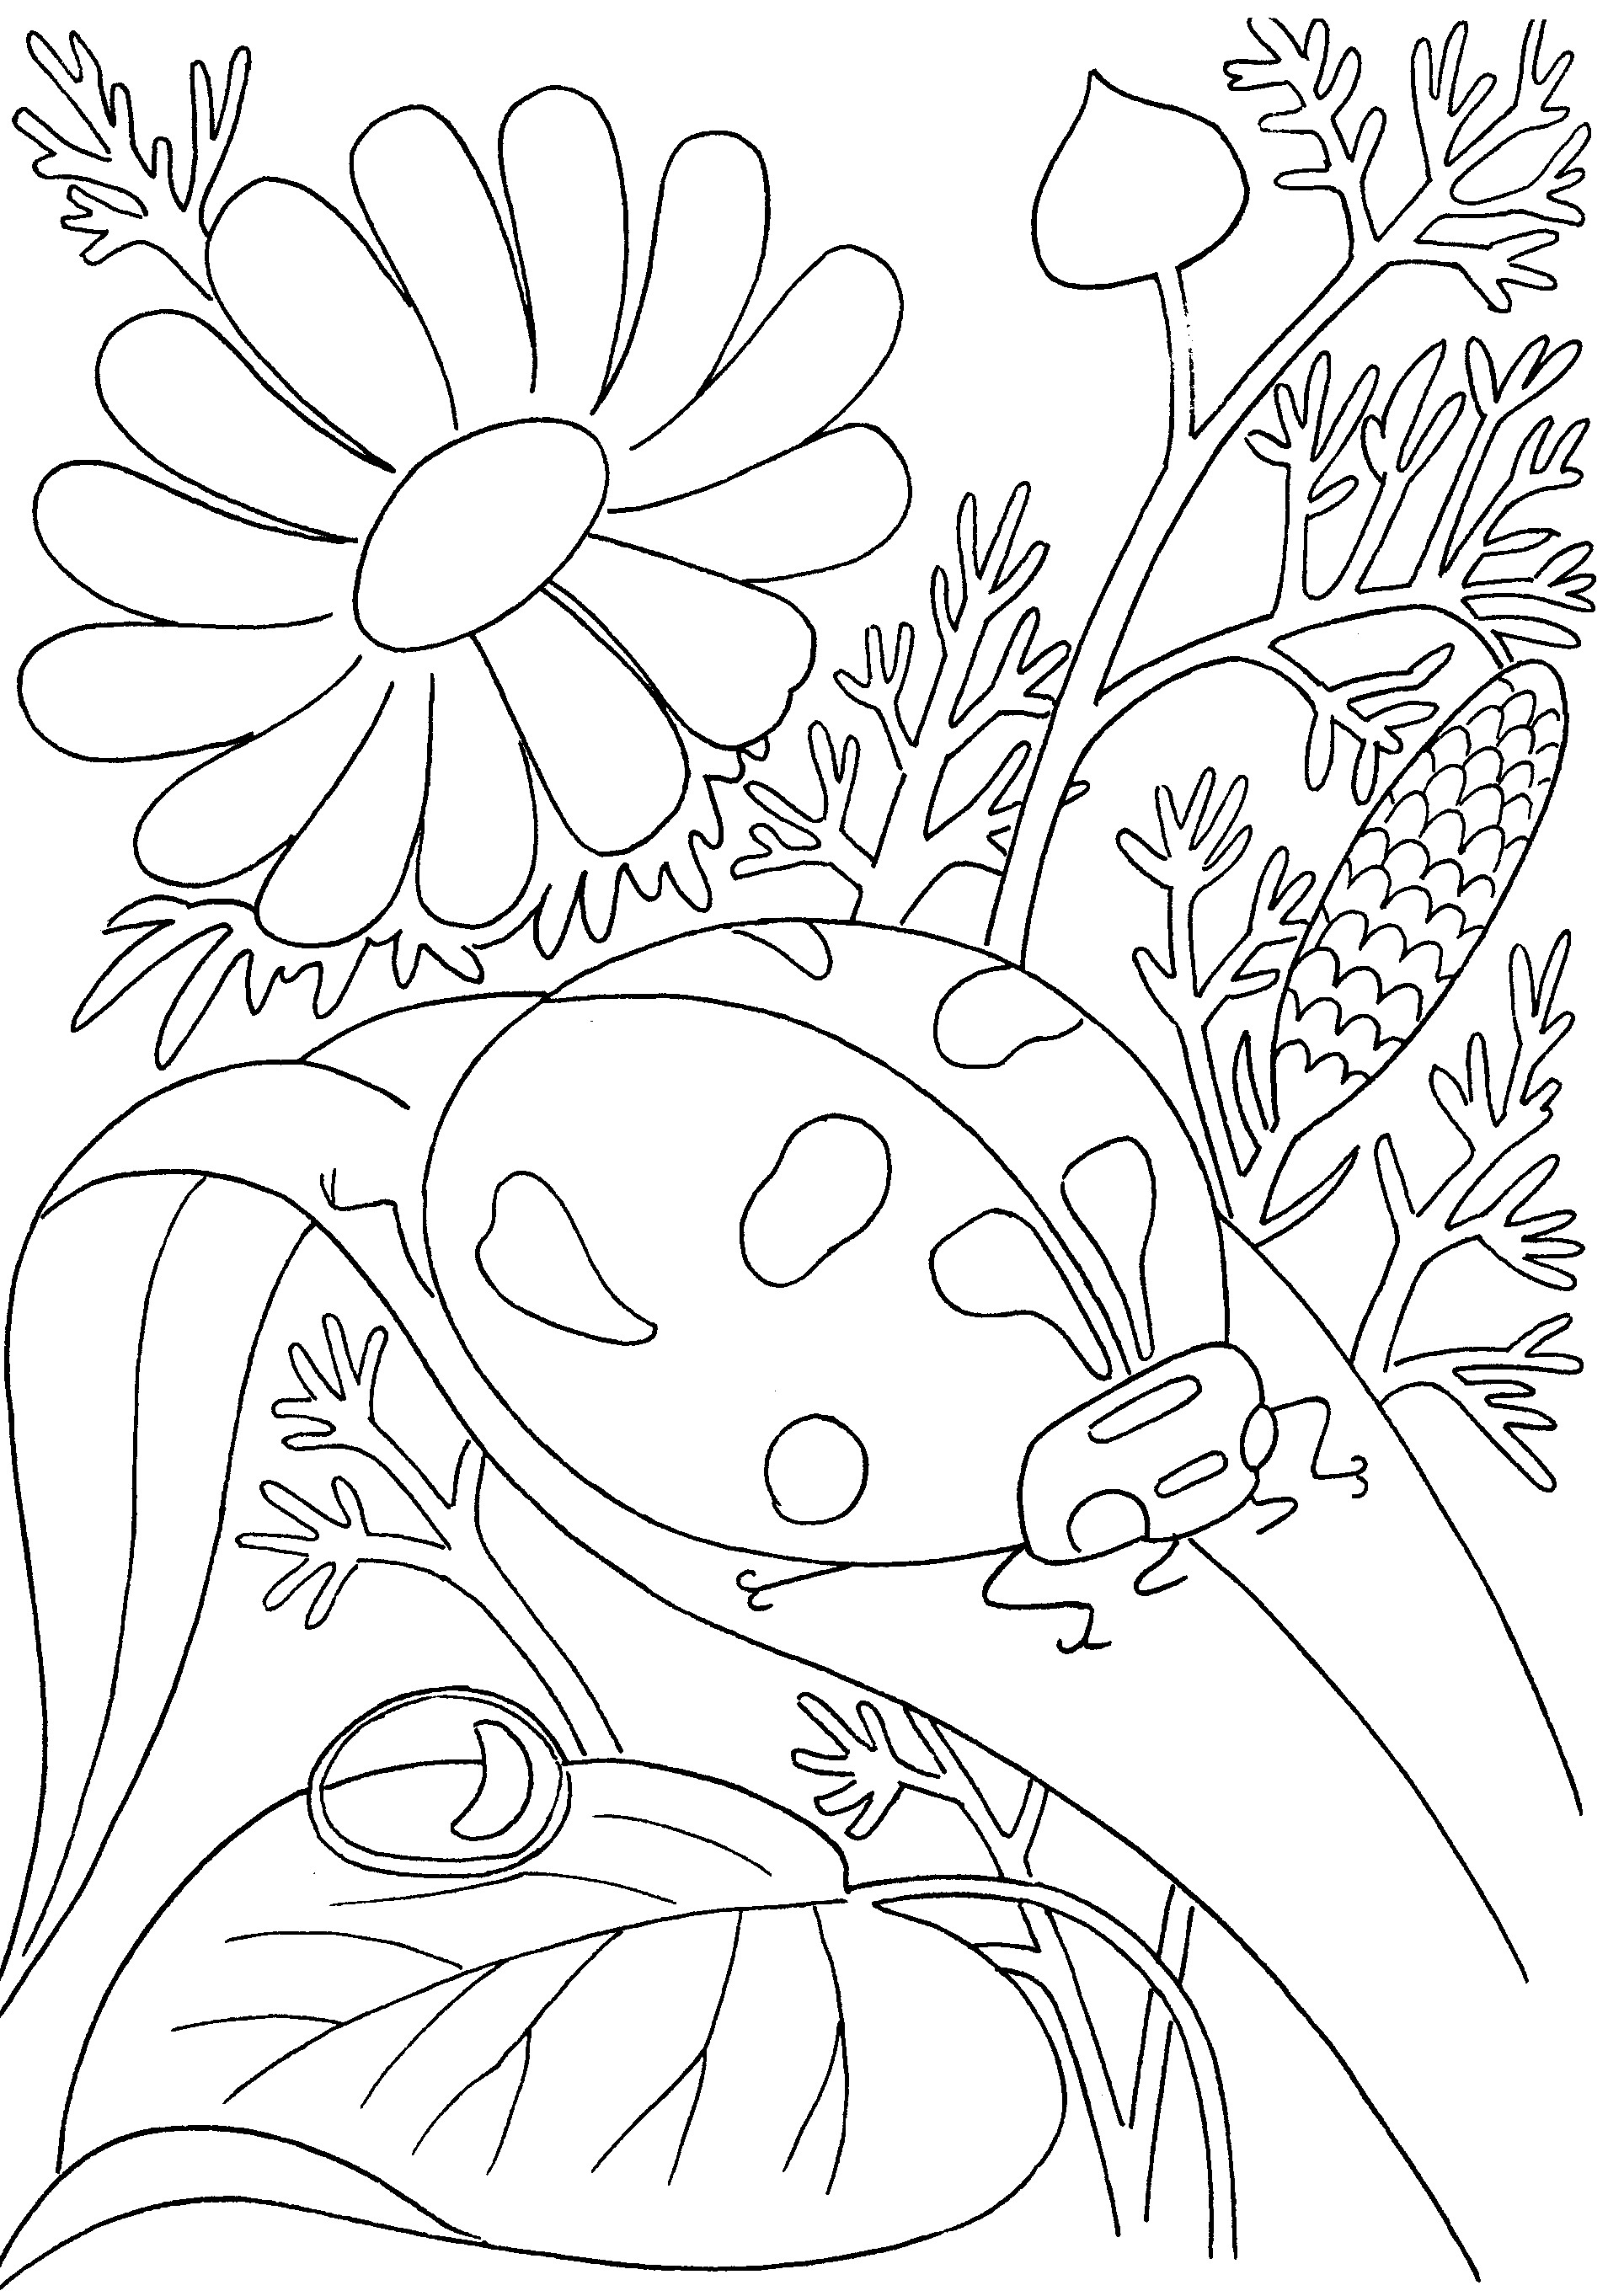 1928x2726 Guaranteed Insect Pictures To Color Coloring Pages Pdf For Children